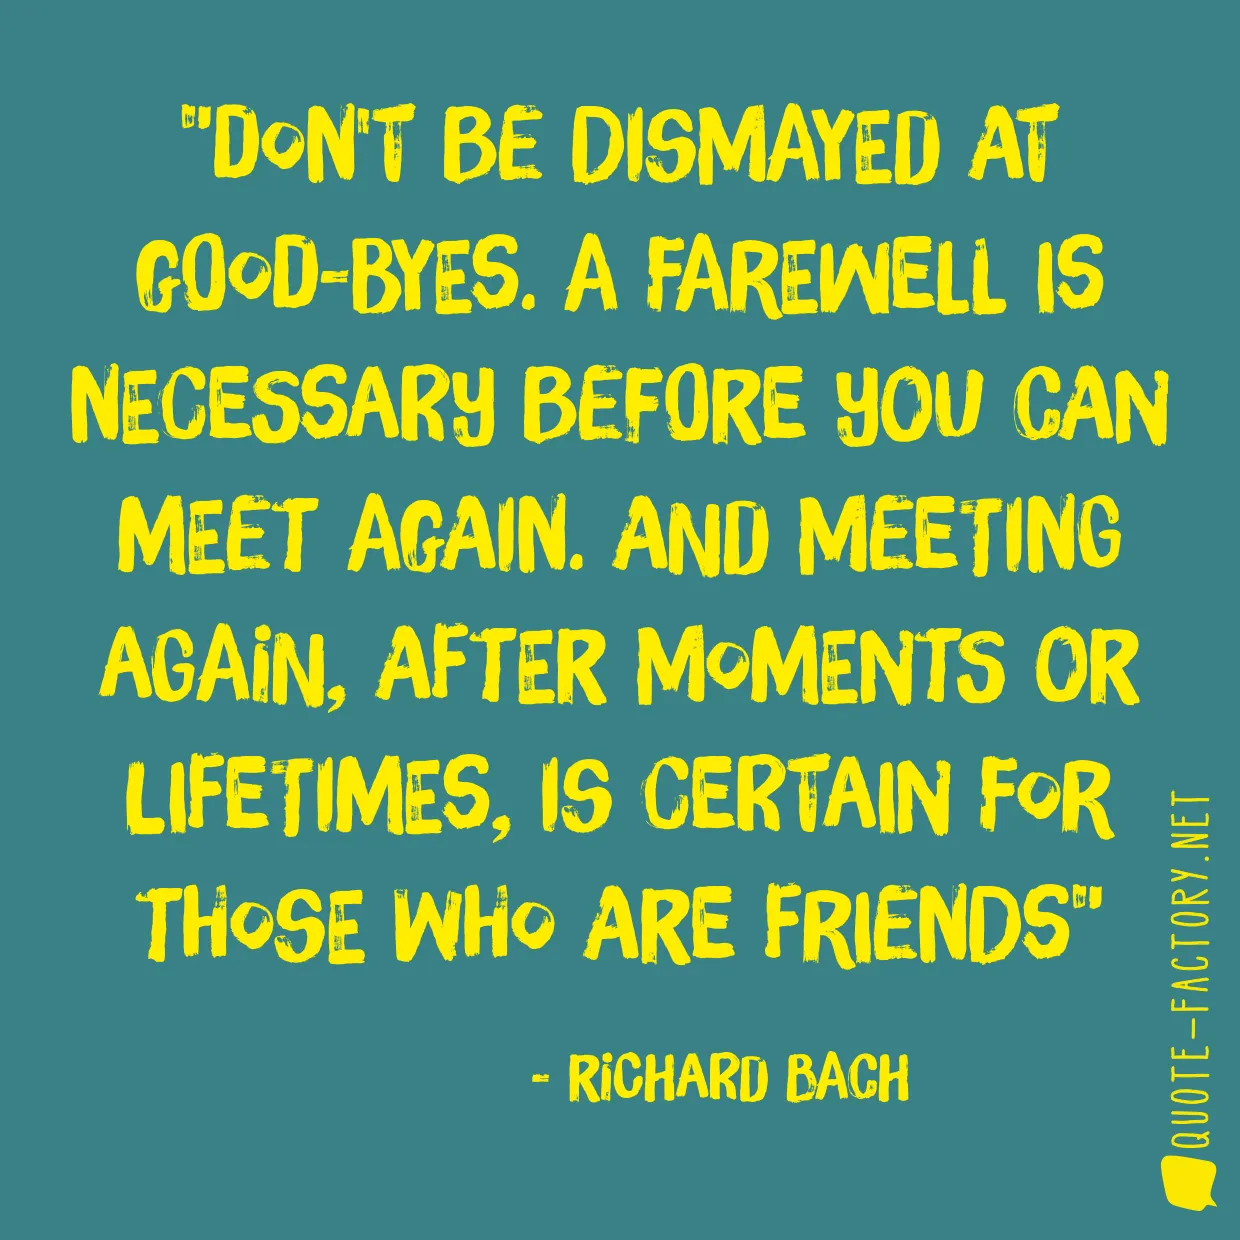 Don't be dismayed at good-byes. A farewell is necessary before you can meet again. And meeting again, after moments or lifetimes, is certain for those who are friends